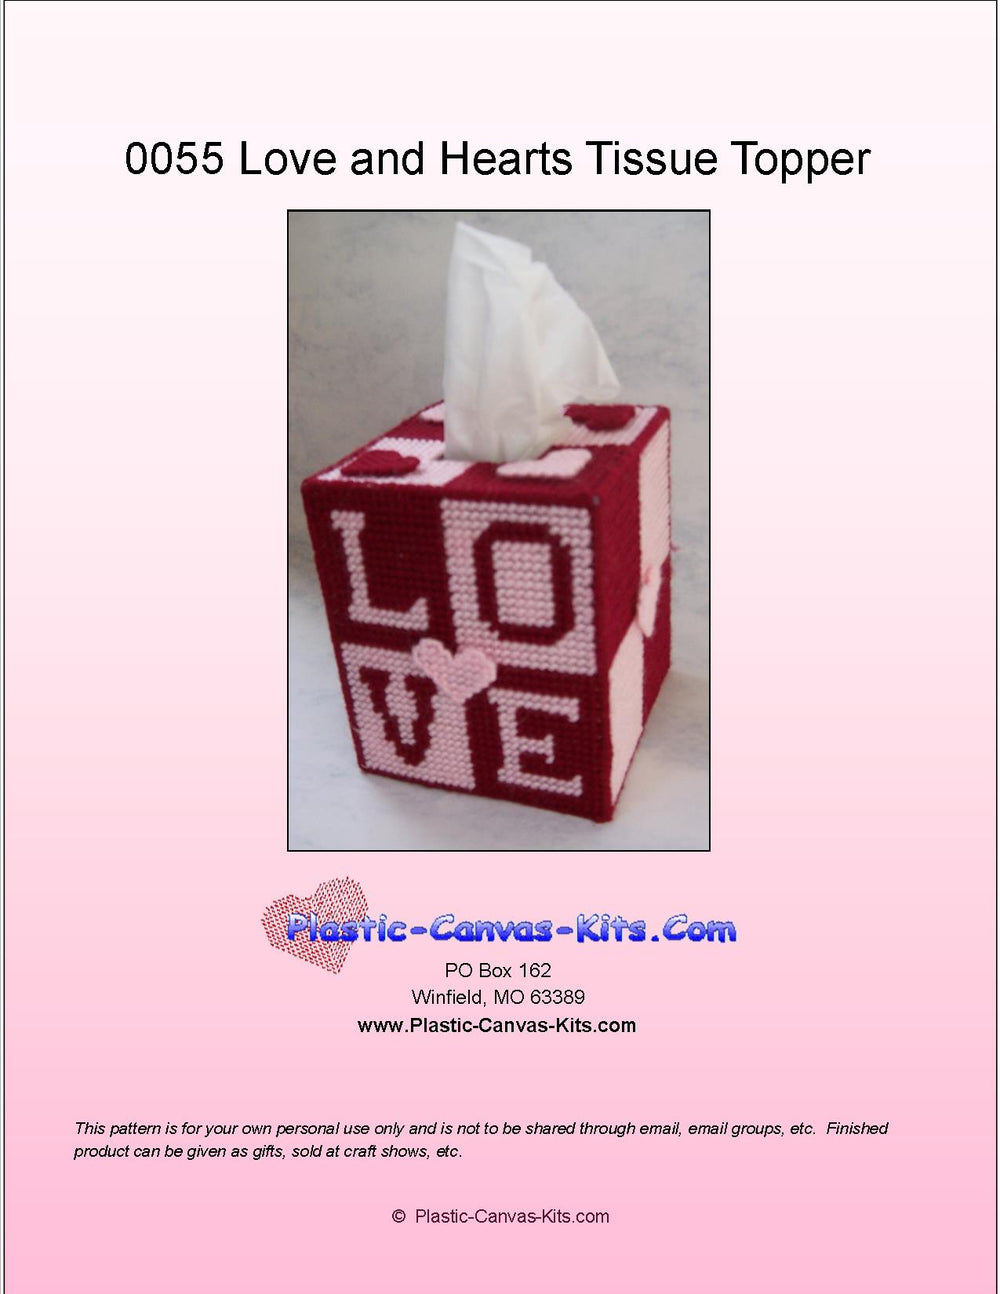 Love and Hearts Tissue Topper